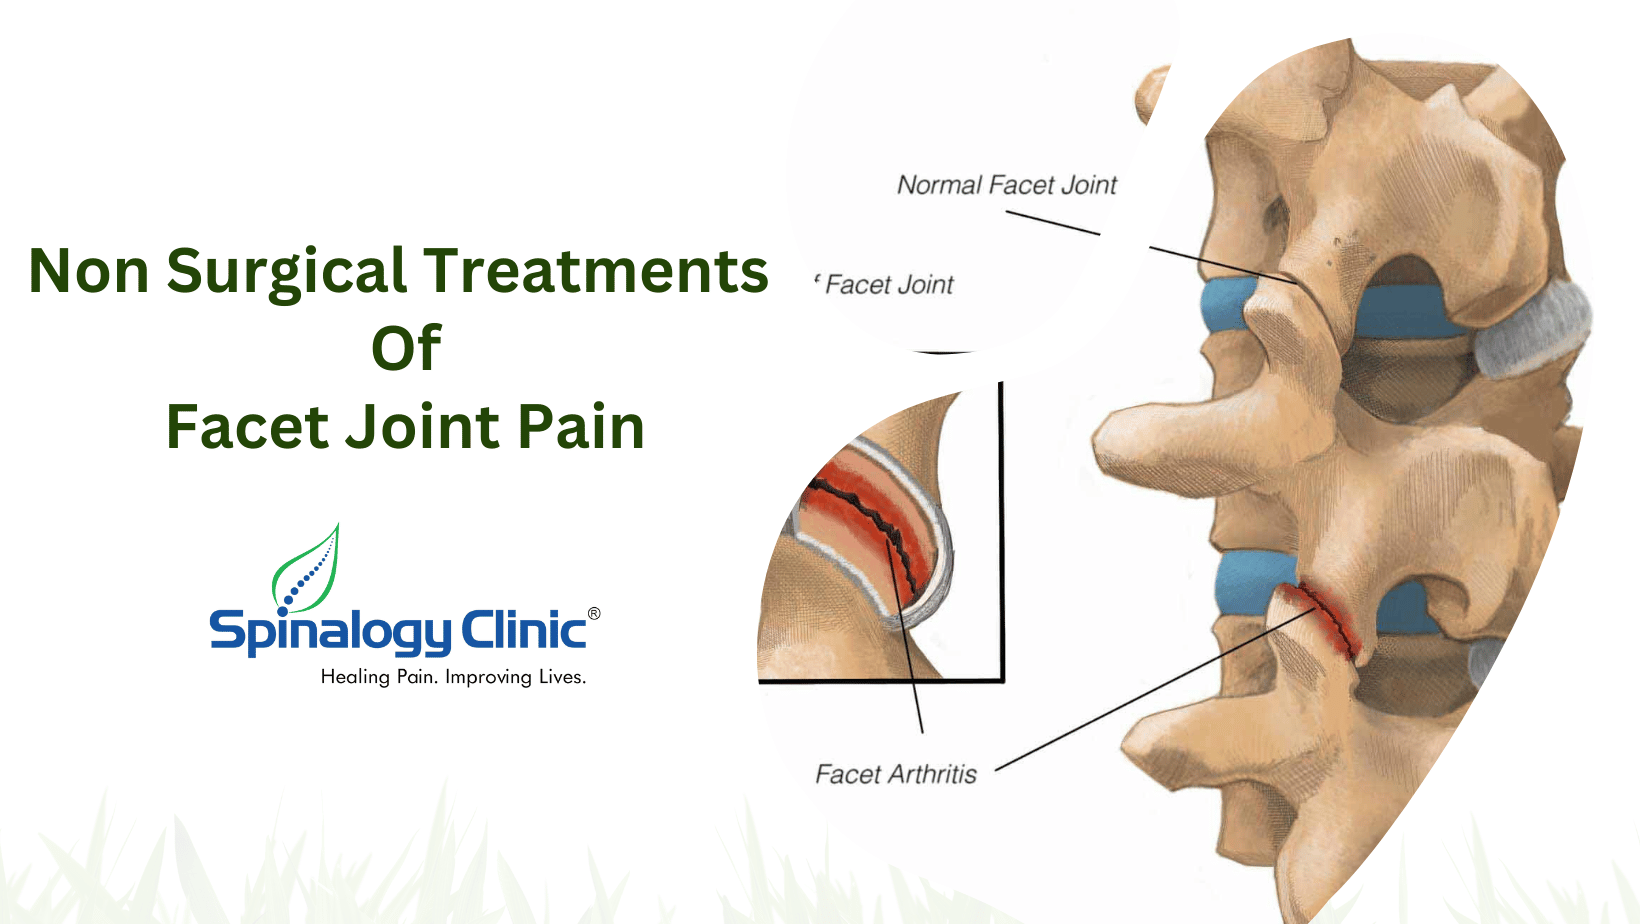 Non Surgical Treatment Of Facet Joint Pain